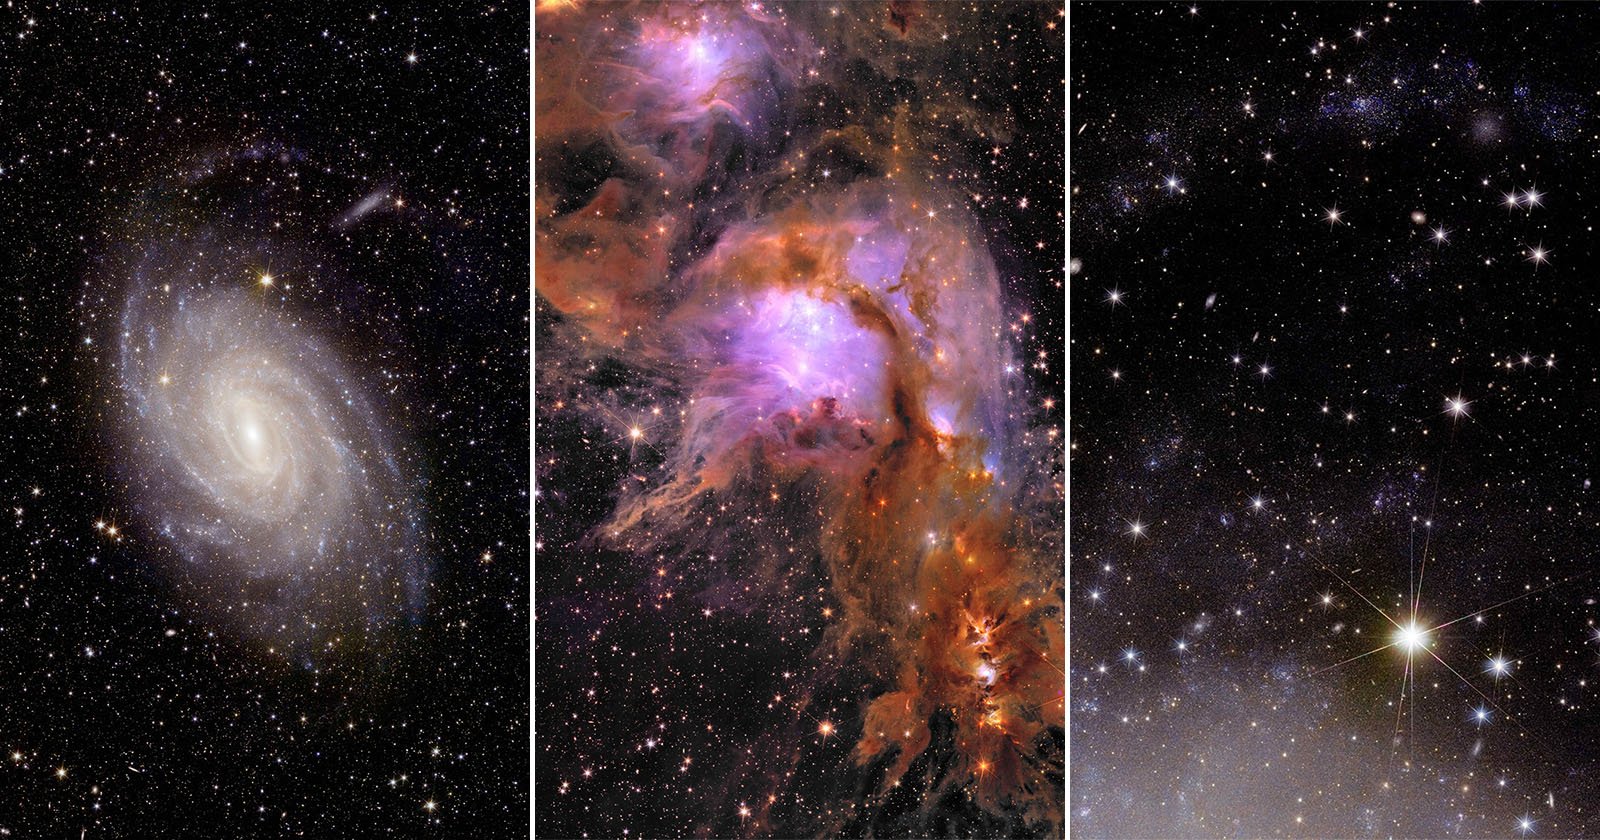 A triptych of space images: the left shows a spiral galaxy with a bright core and extended arms; the center features a nebula with vibrant purple and red hues; the right displays a star field with numerous stars, including a prominent, shining star in the lower right.